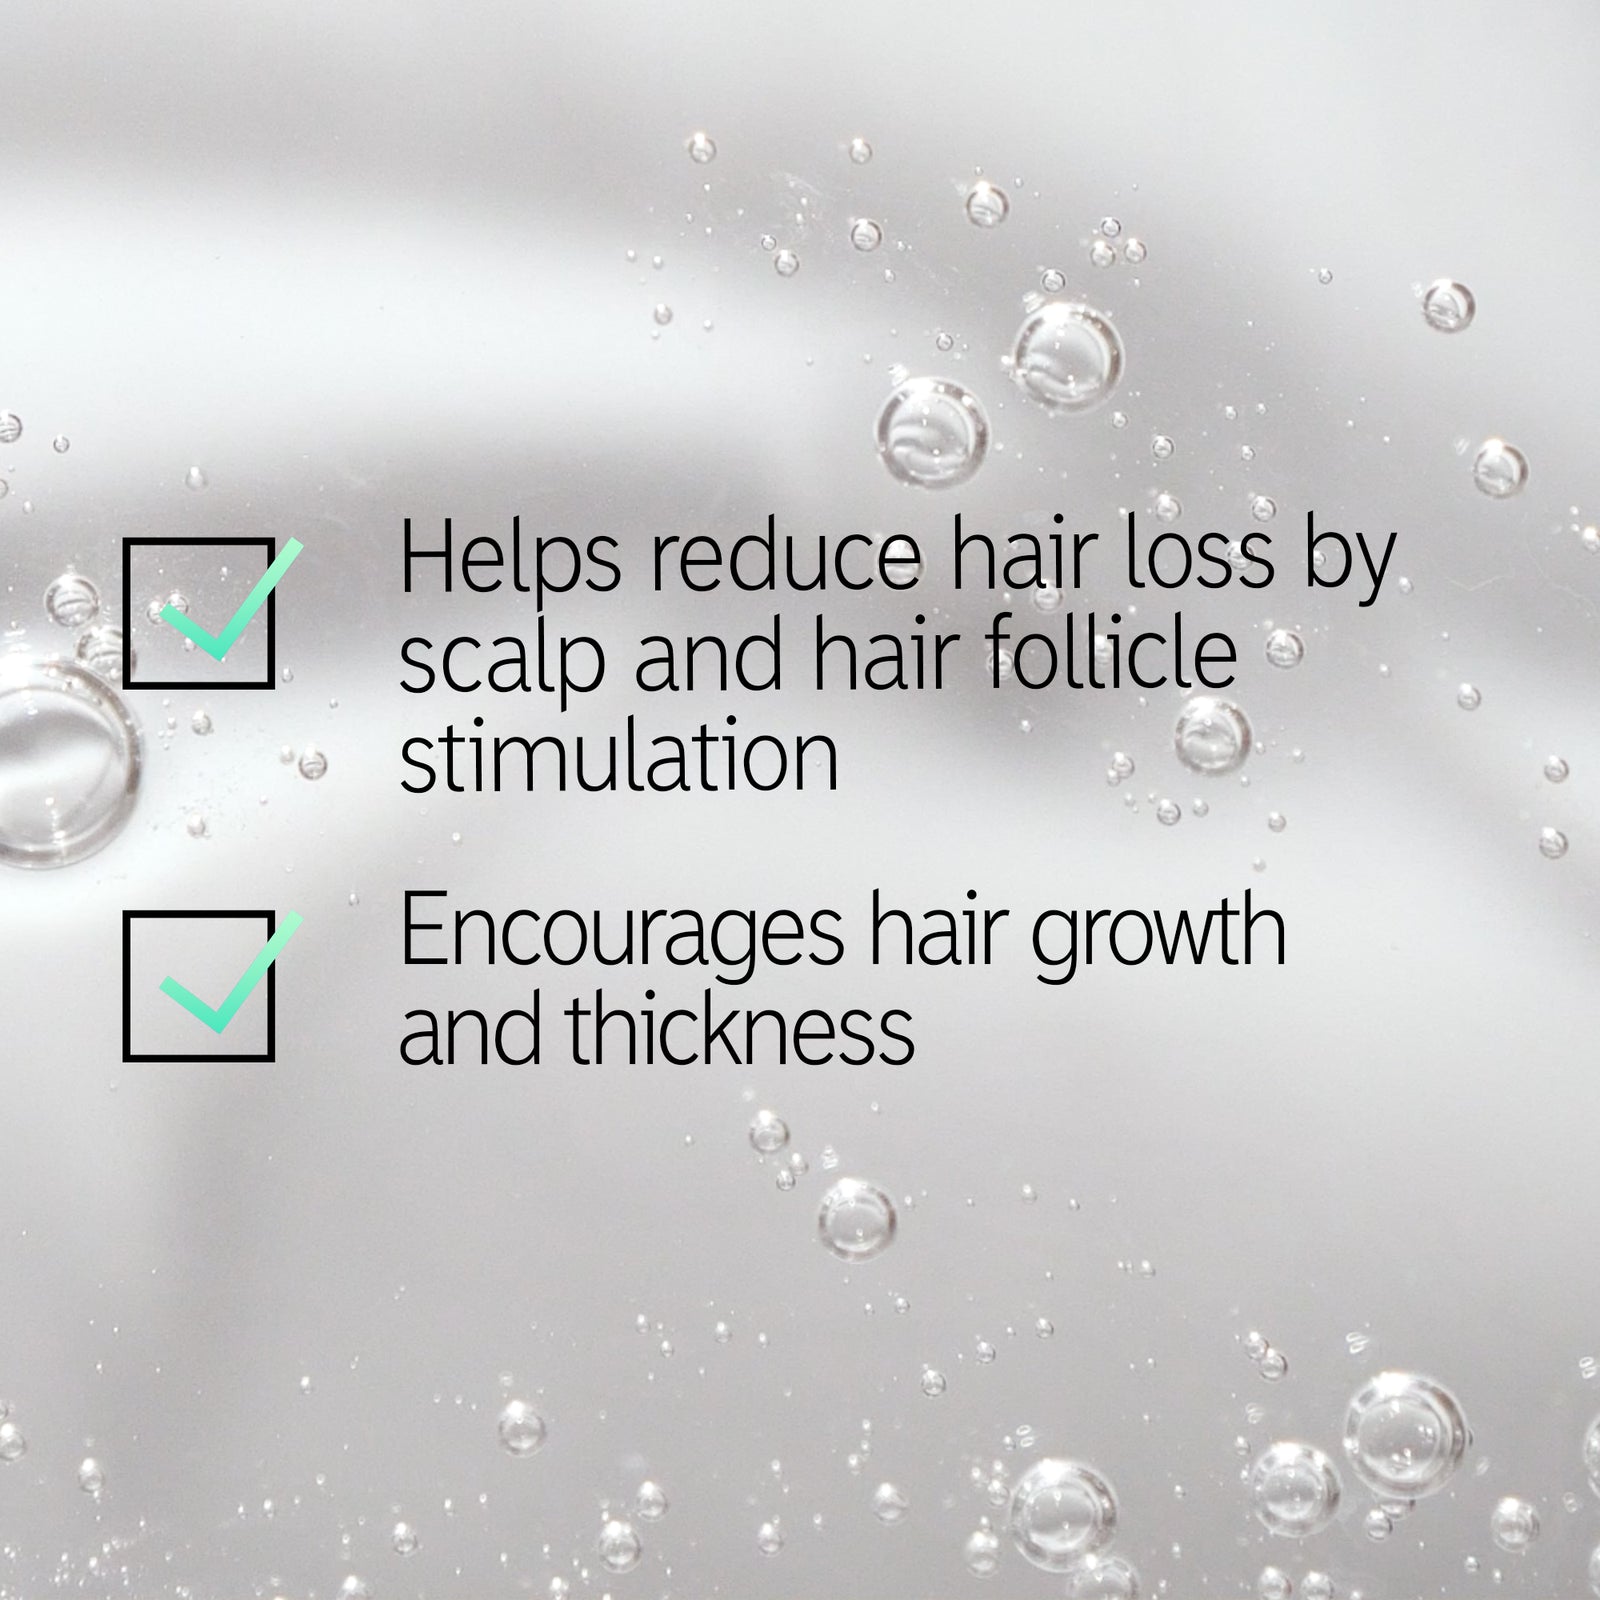 Infographic reading 'Helps reduce hair loss by scalp and hair follicle stimulation' and 'Encourages hair growth and thickness'